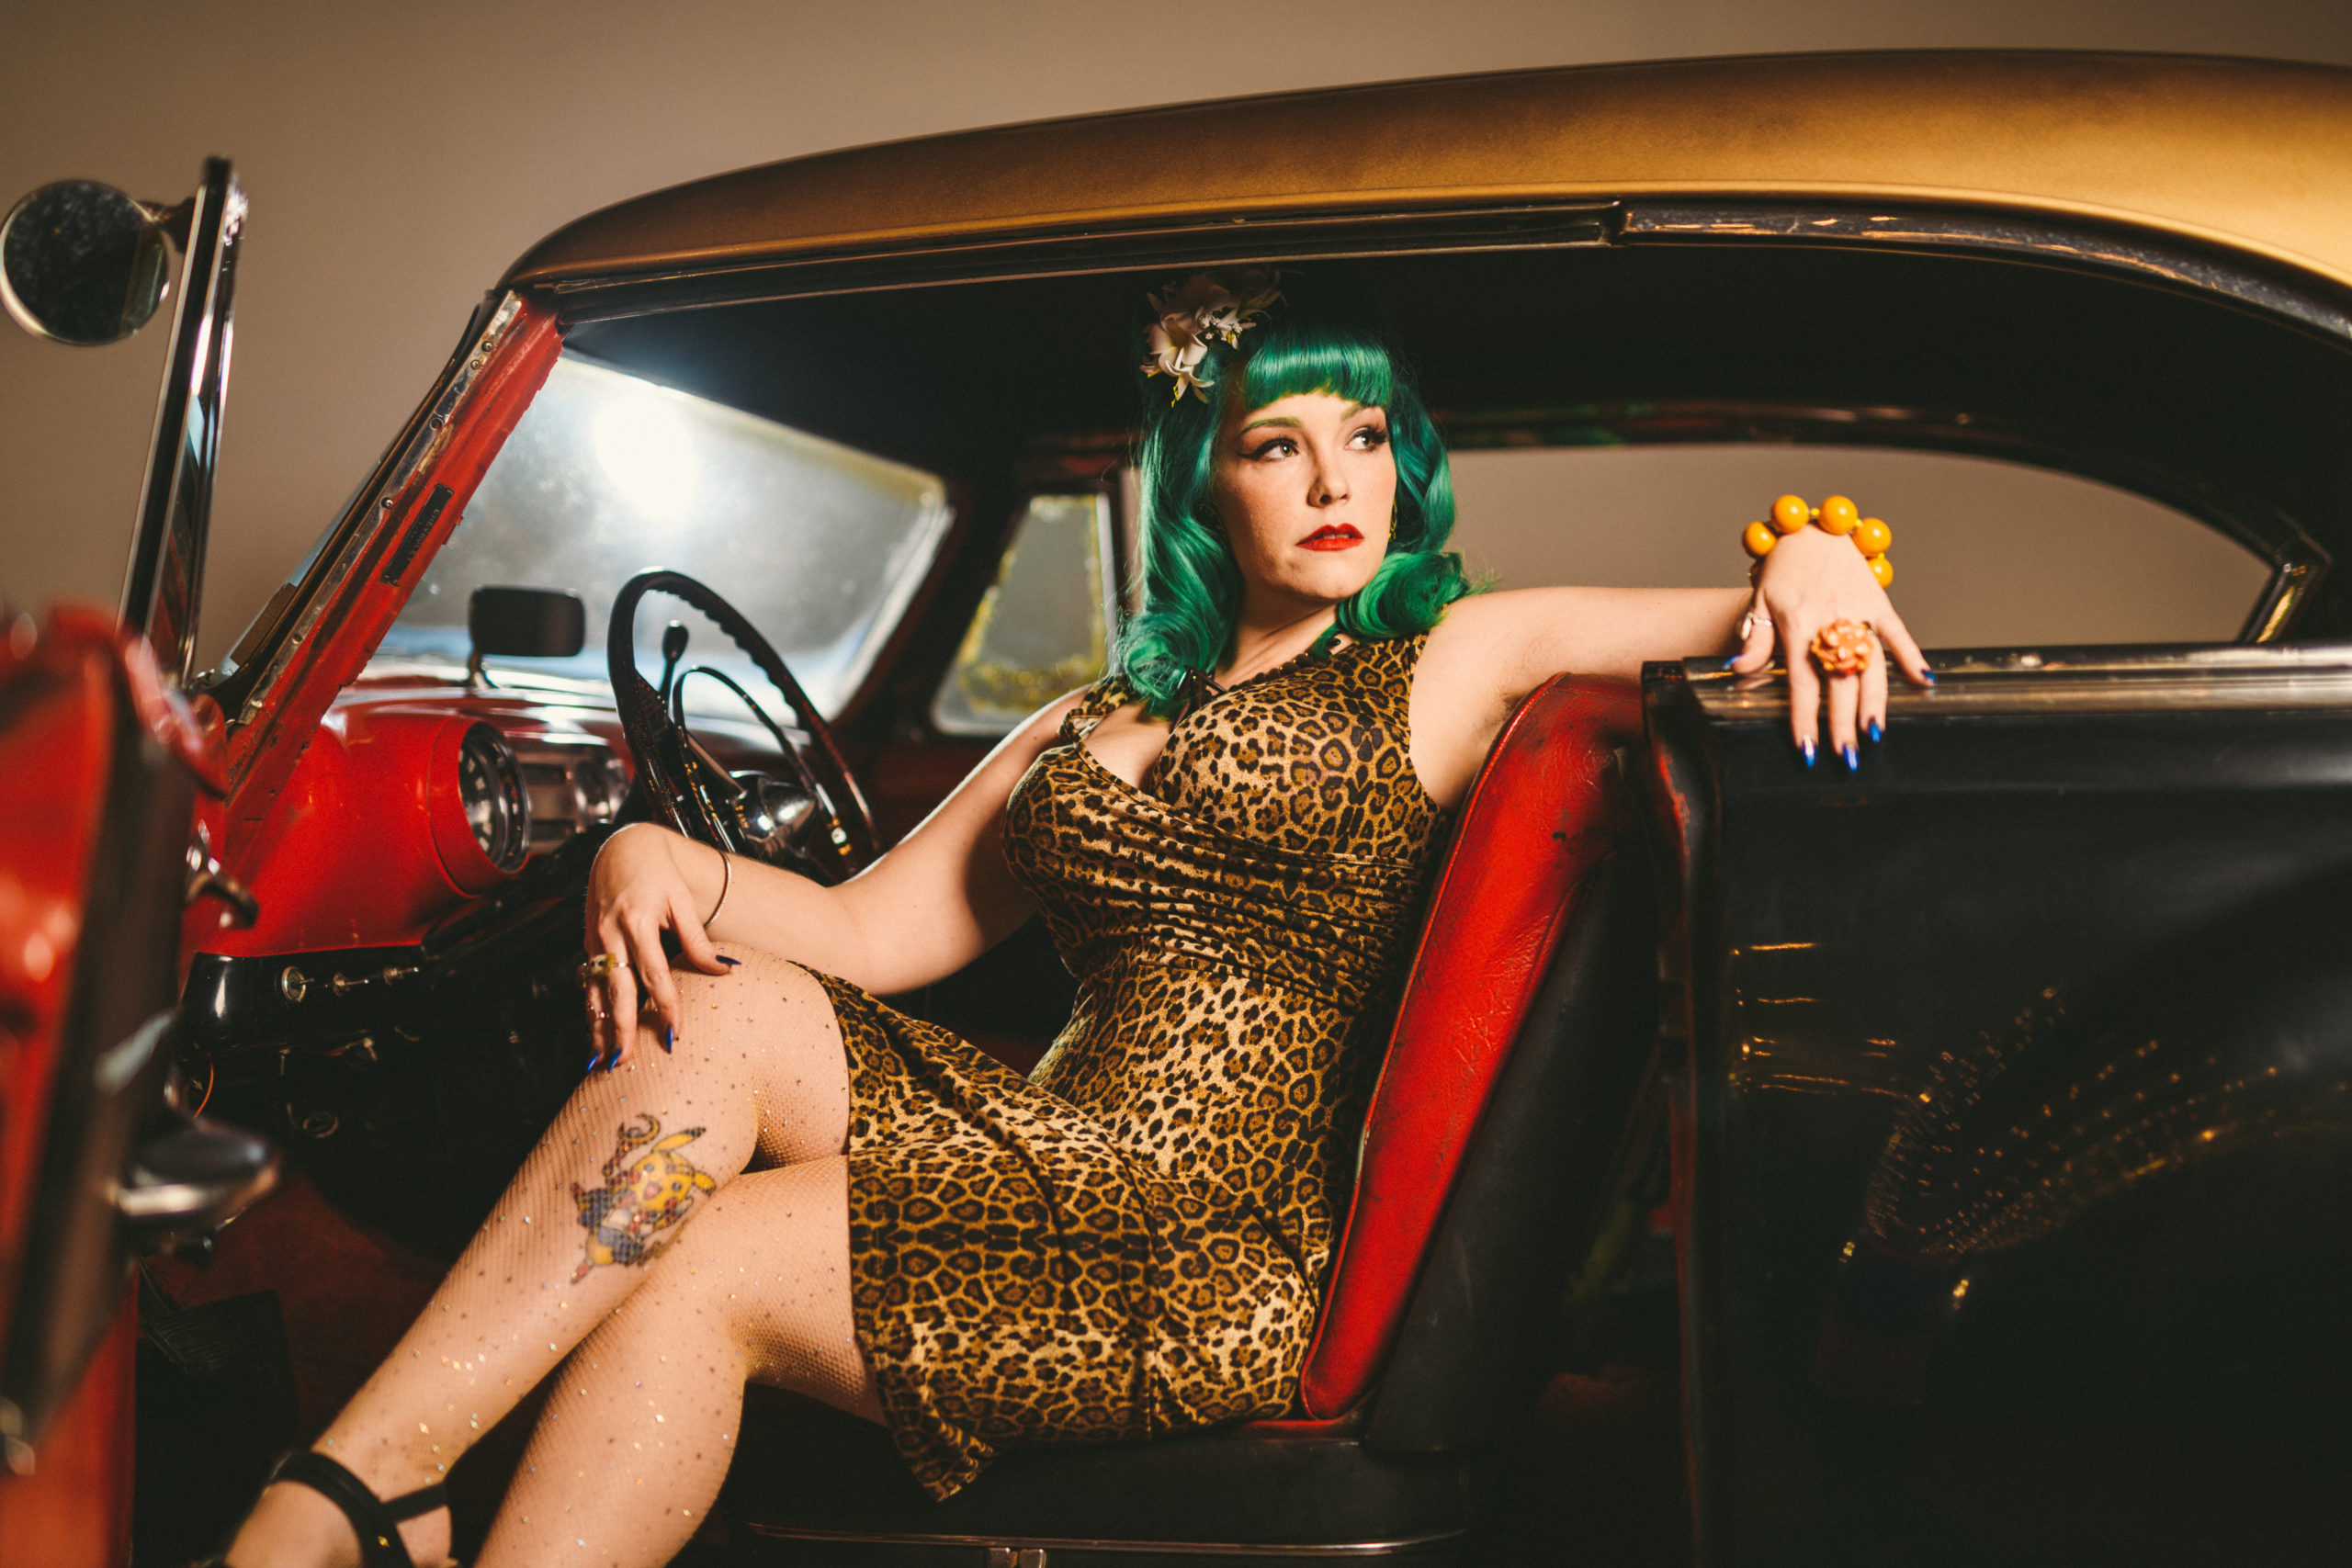 Closeup of woman wearing a green wig and leopard patterned dress and speckled pantyhose posing in a black car with red and black seats and trim looking off to the side